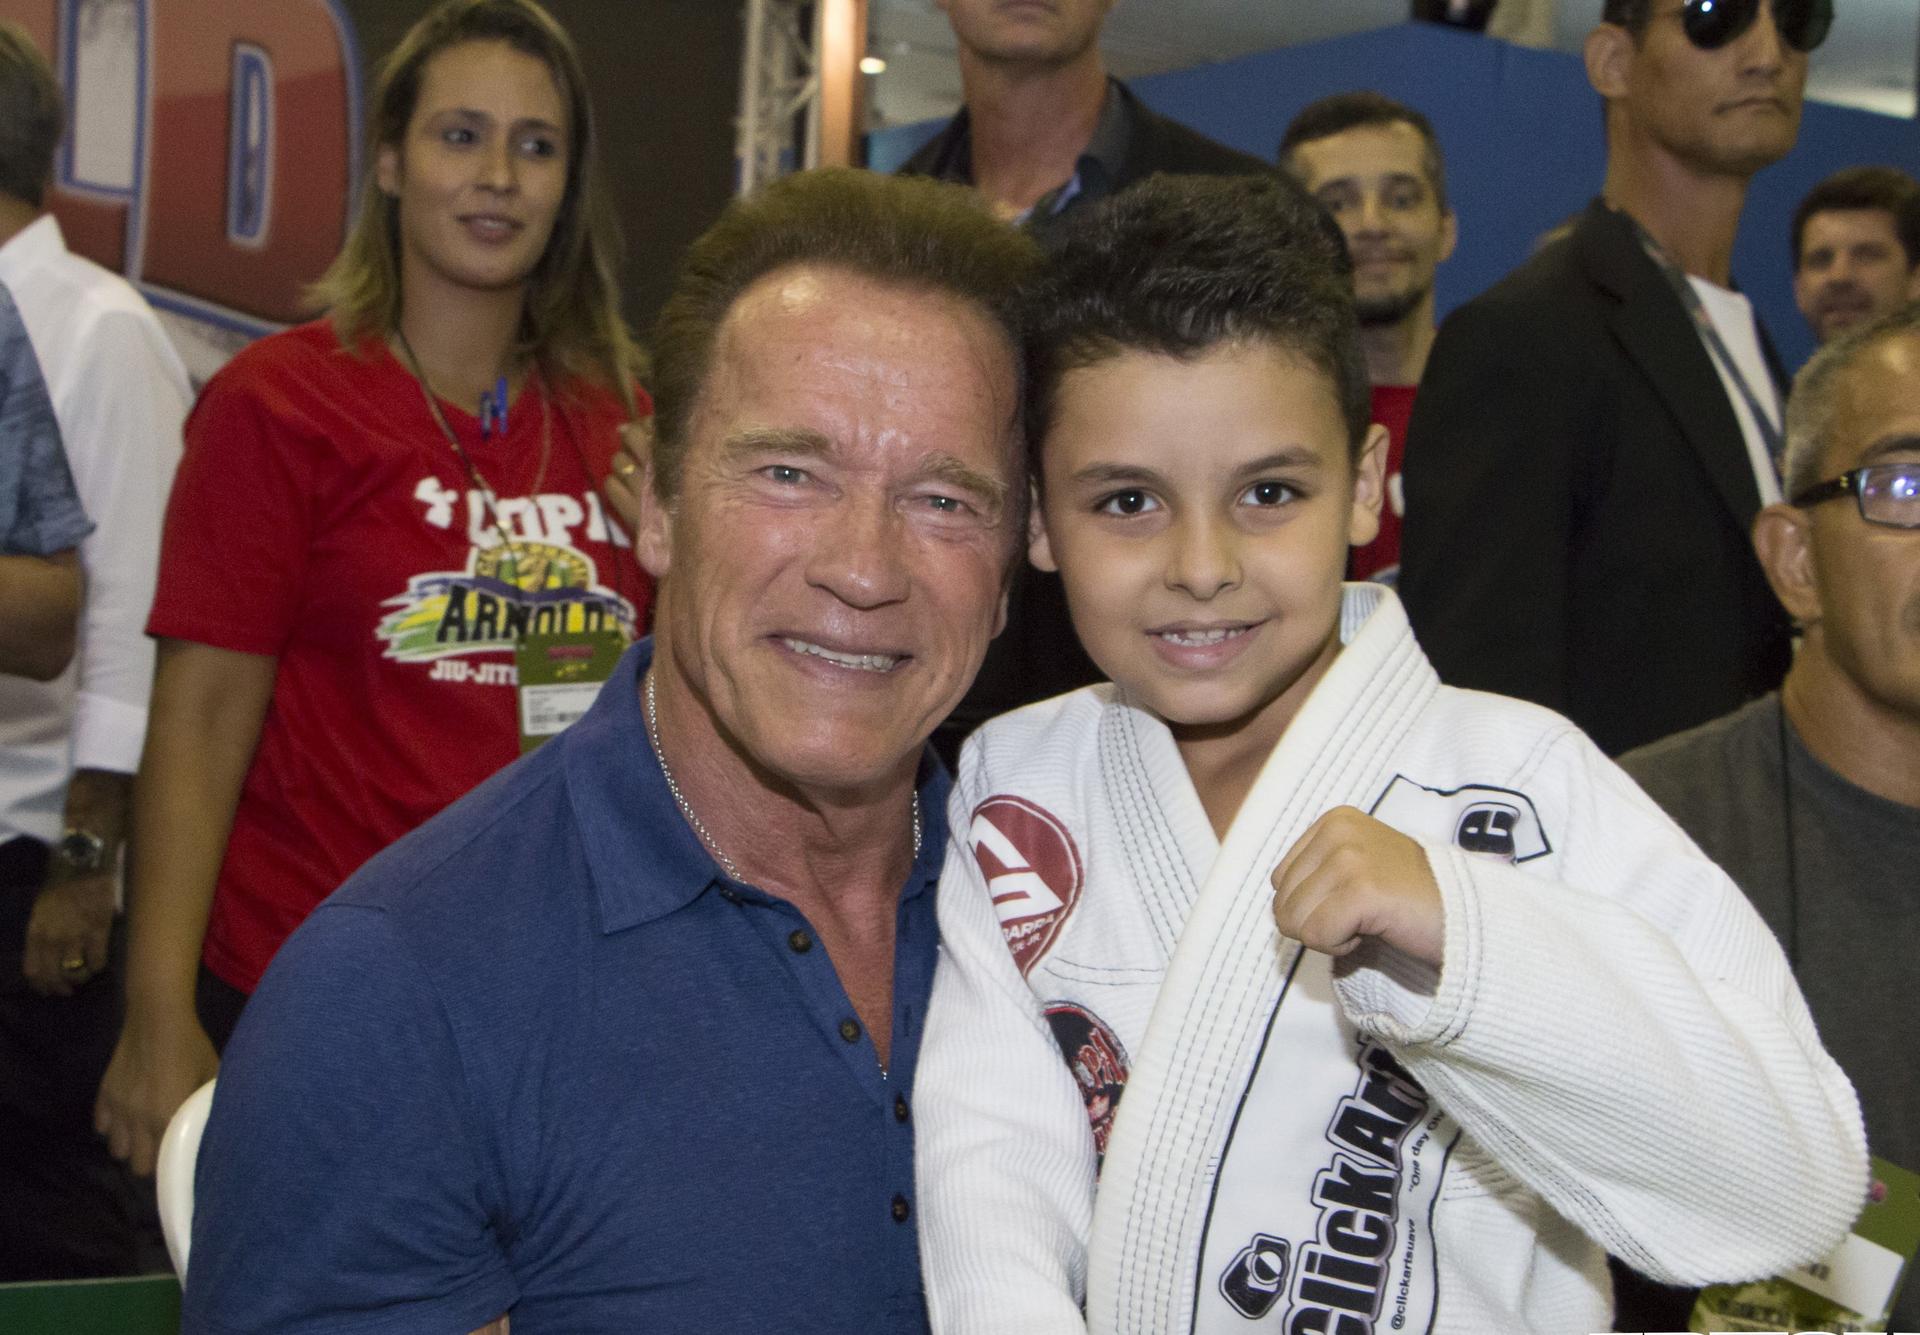 Arnold Schwarzenegger with a budding martial artist at an Arnold Classic event.